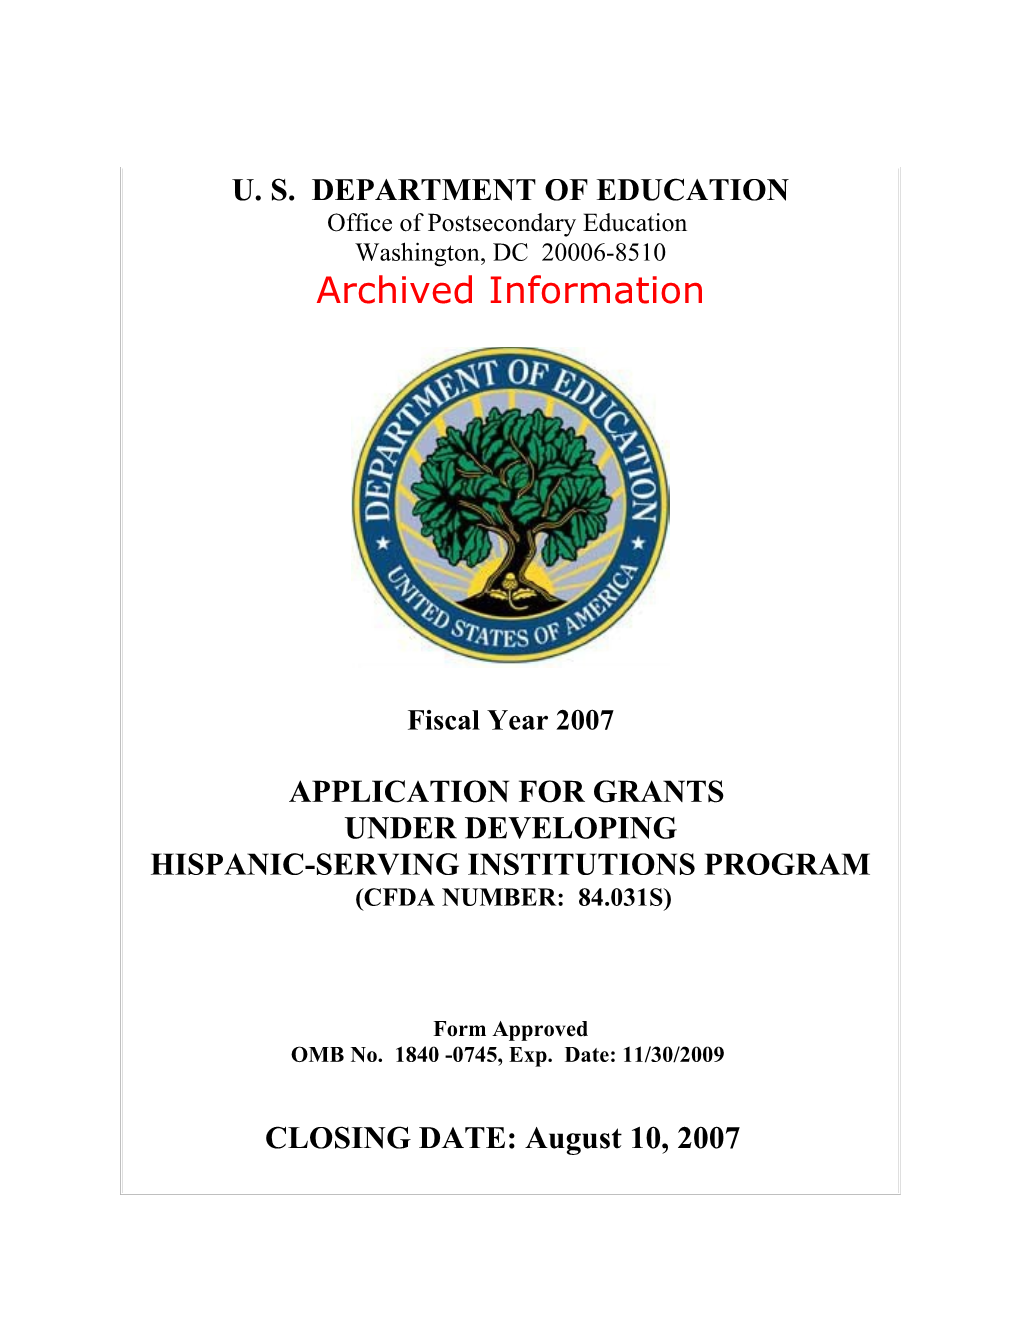 Archived: FY 2007 Grant Application Package for the Title V Strengthening Hispanic-Serving